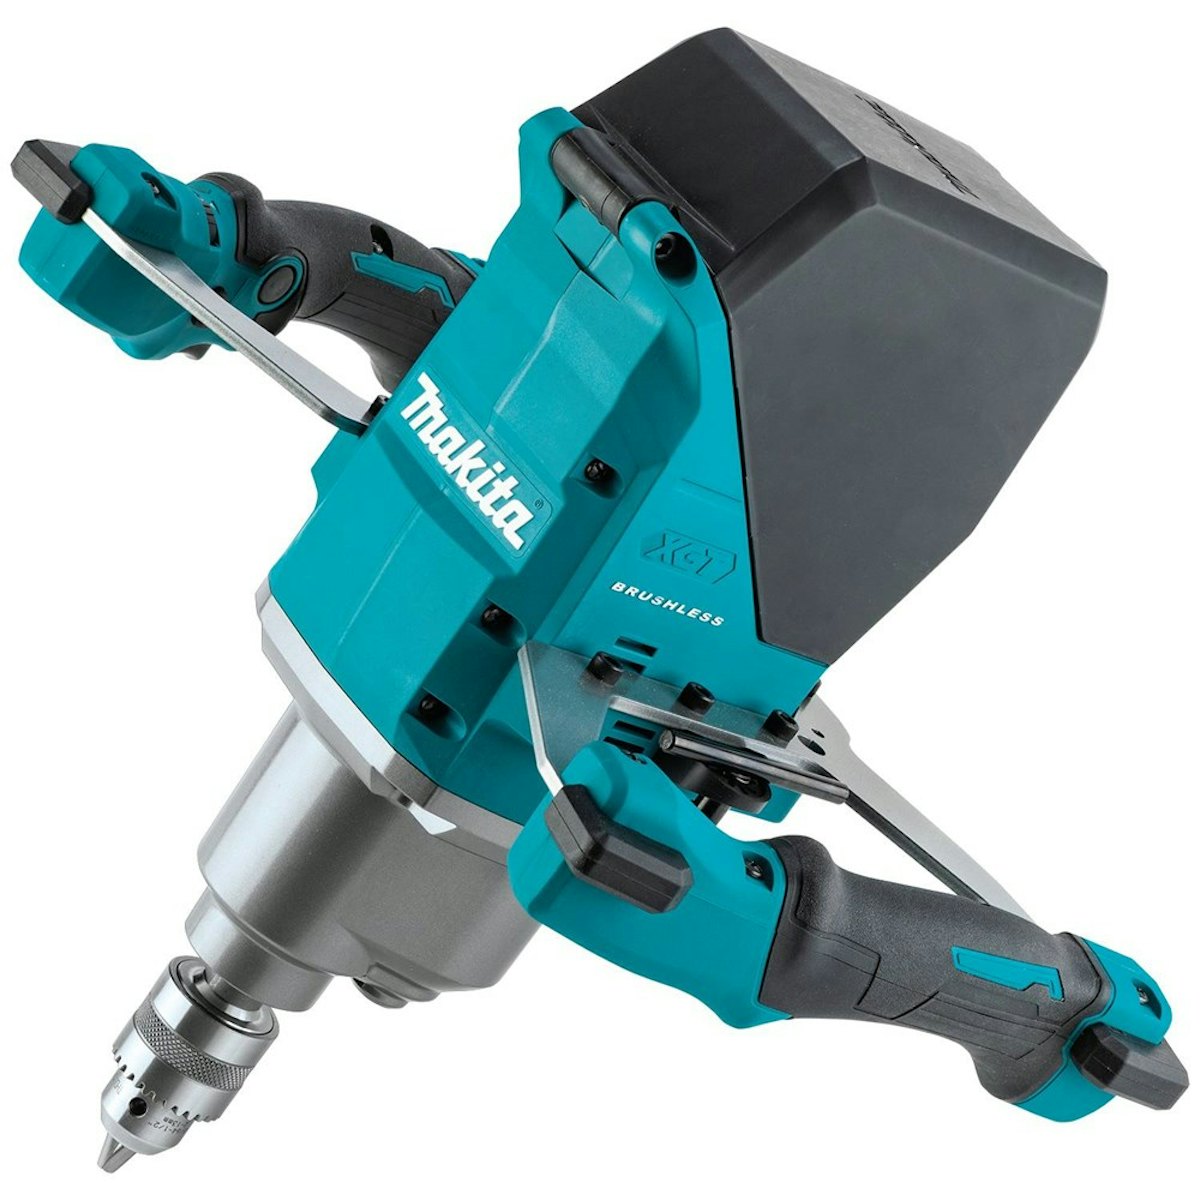 Makita U.S.A.  Press Releases: 2023 MAKITA ADDS 9 NEW XGT® CORDLESS TOOLS  AND EQUIPMENT TO EXPANDING SYSTEM